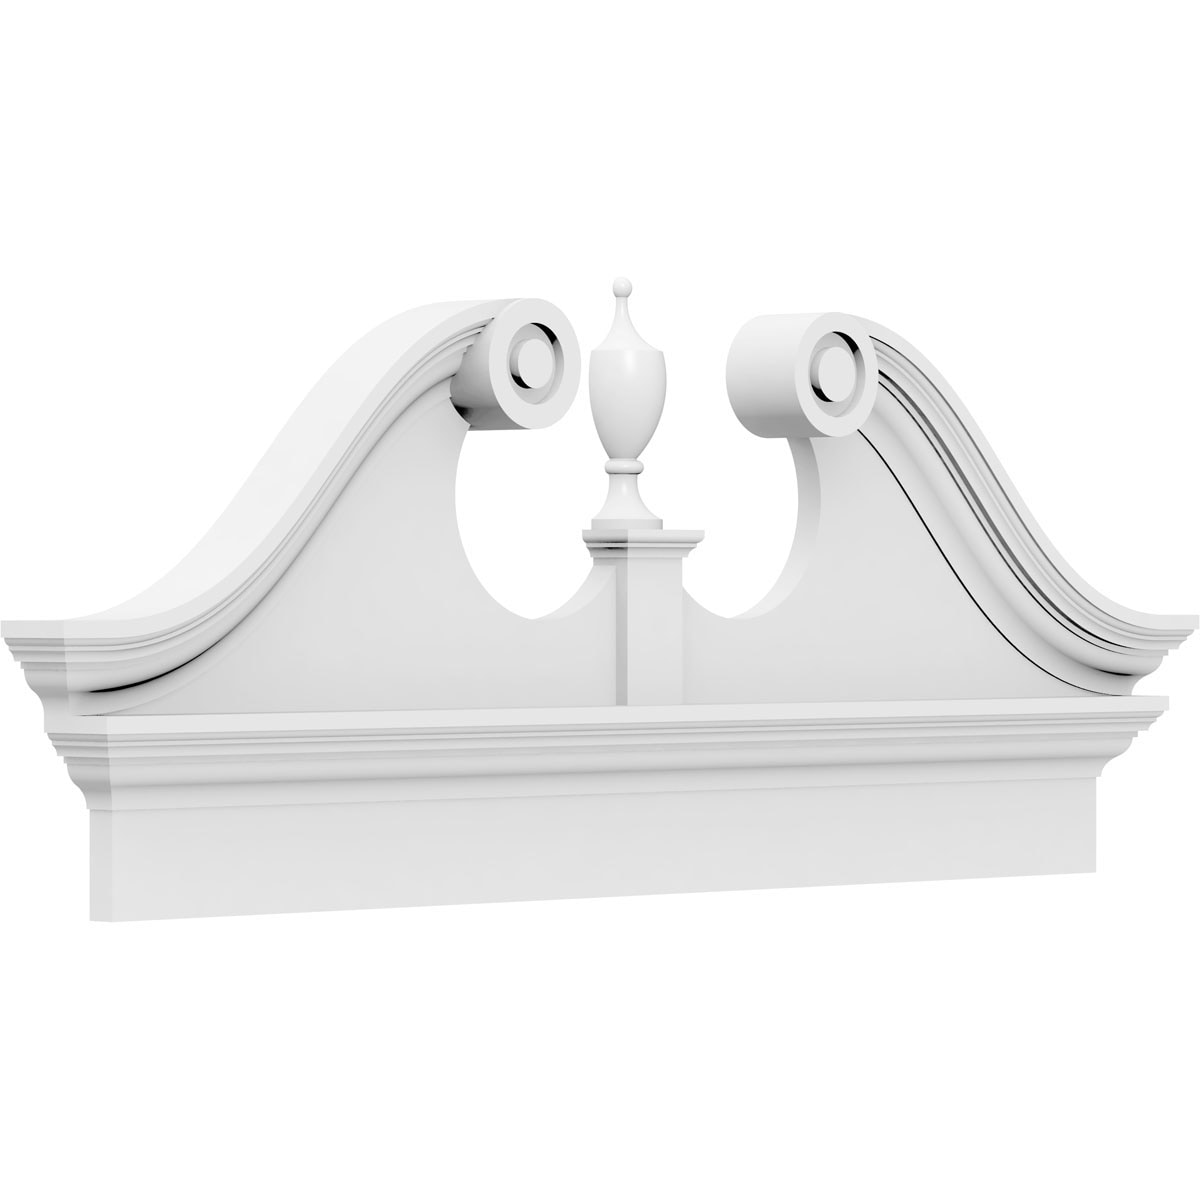 Ekena Millwork Rams Head 46-in x 18-3/8-in Unfinished PVC Pediment Entry Door Casing Accent in White | PEDPC046X185RHP00